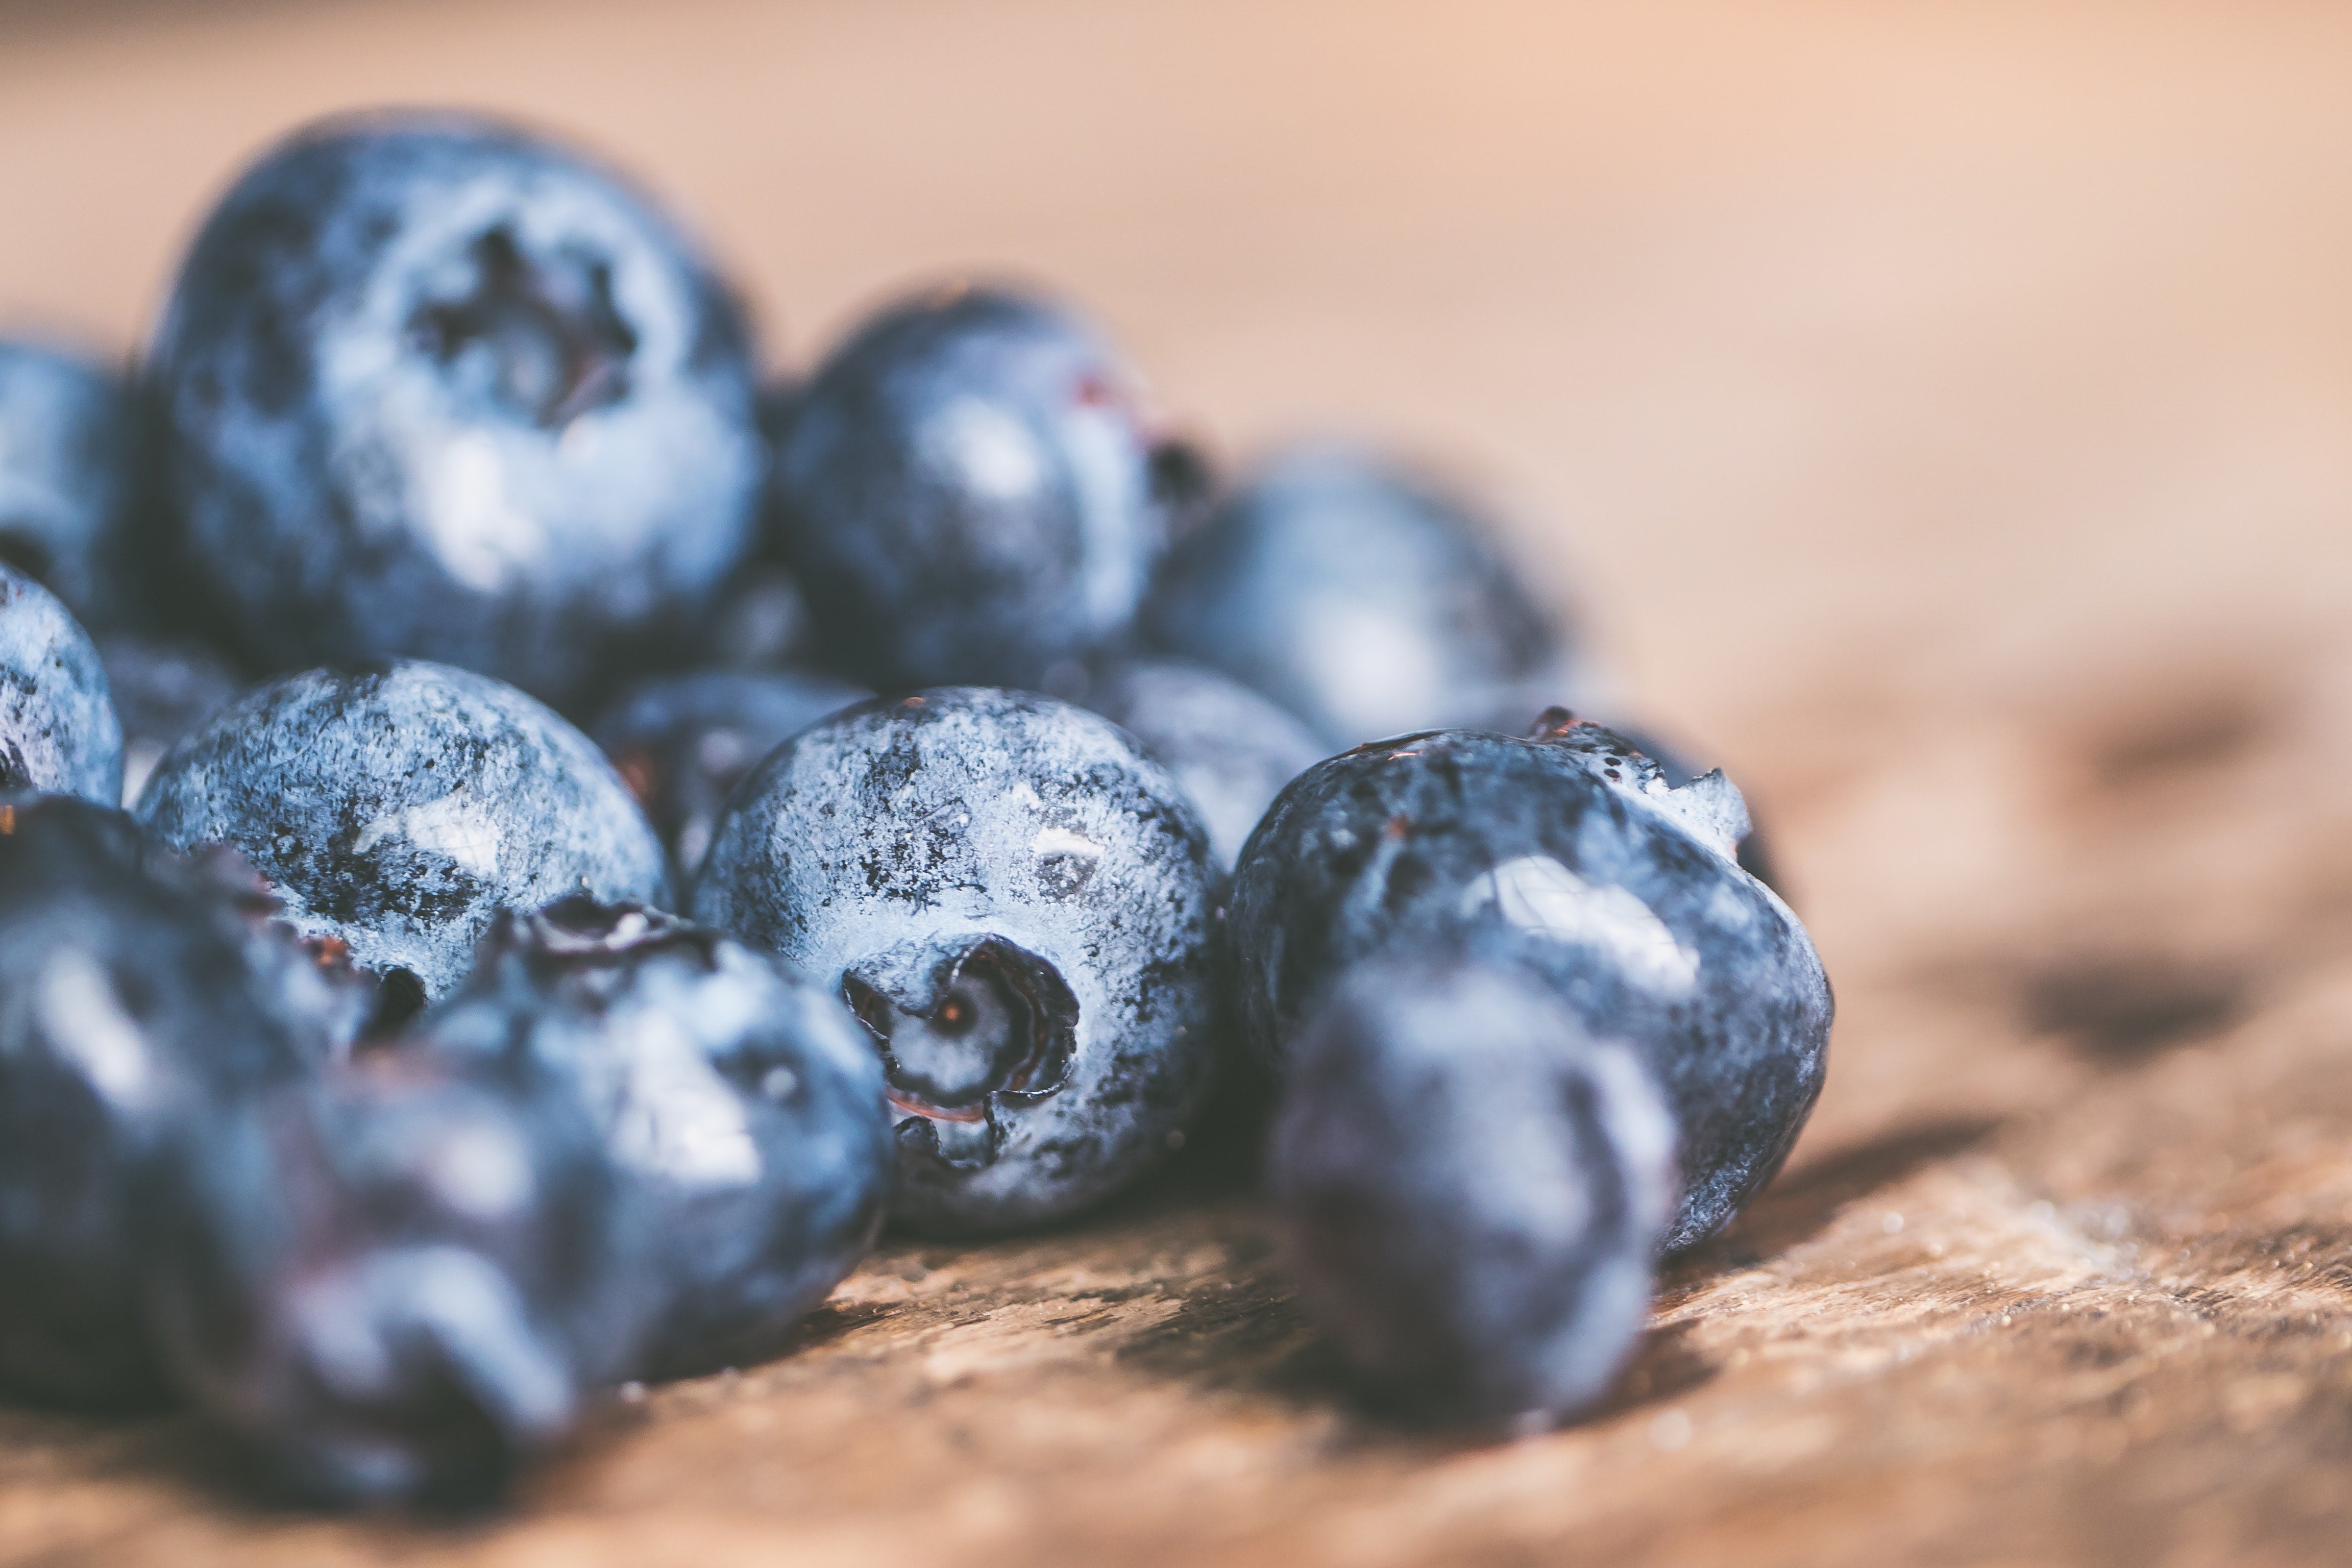 7 QUESTIONS ABOUT THE ACAI BERRY AND IT'S ASCENDANT BENEFITS